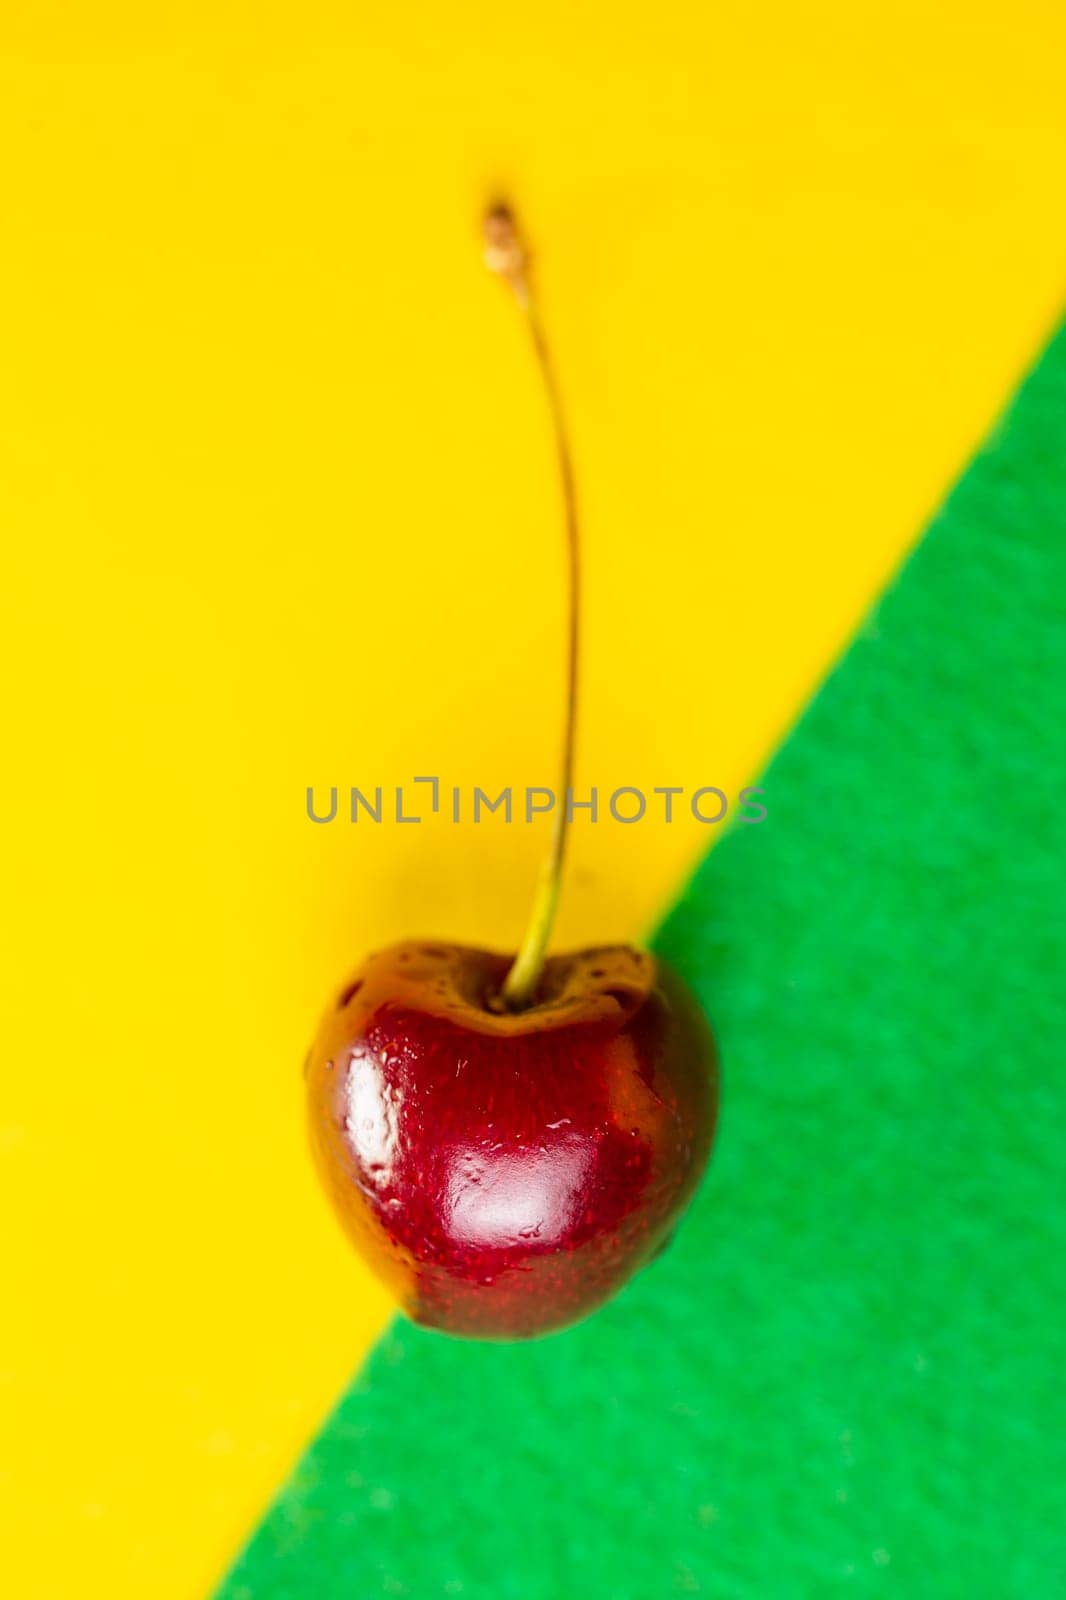 cherry in a close-up section on a yellow background by Pukhovskiy